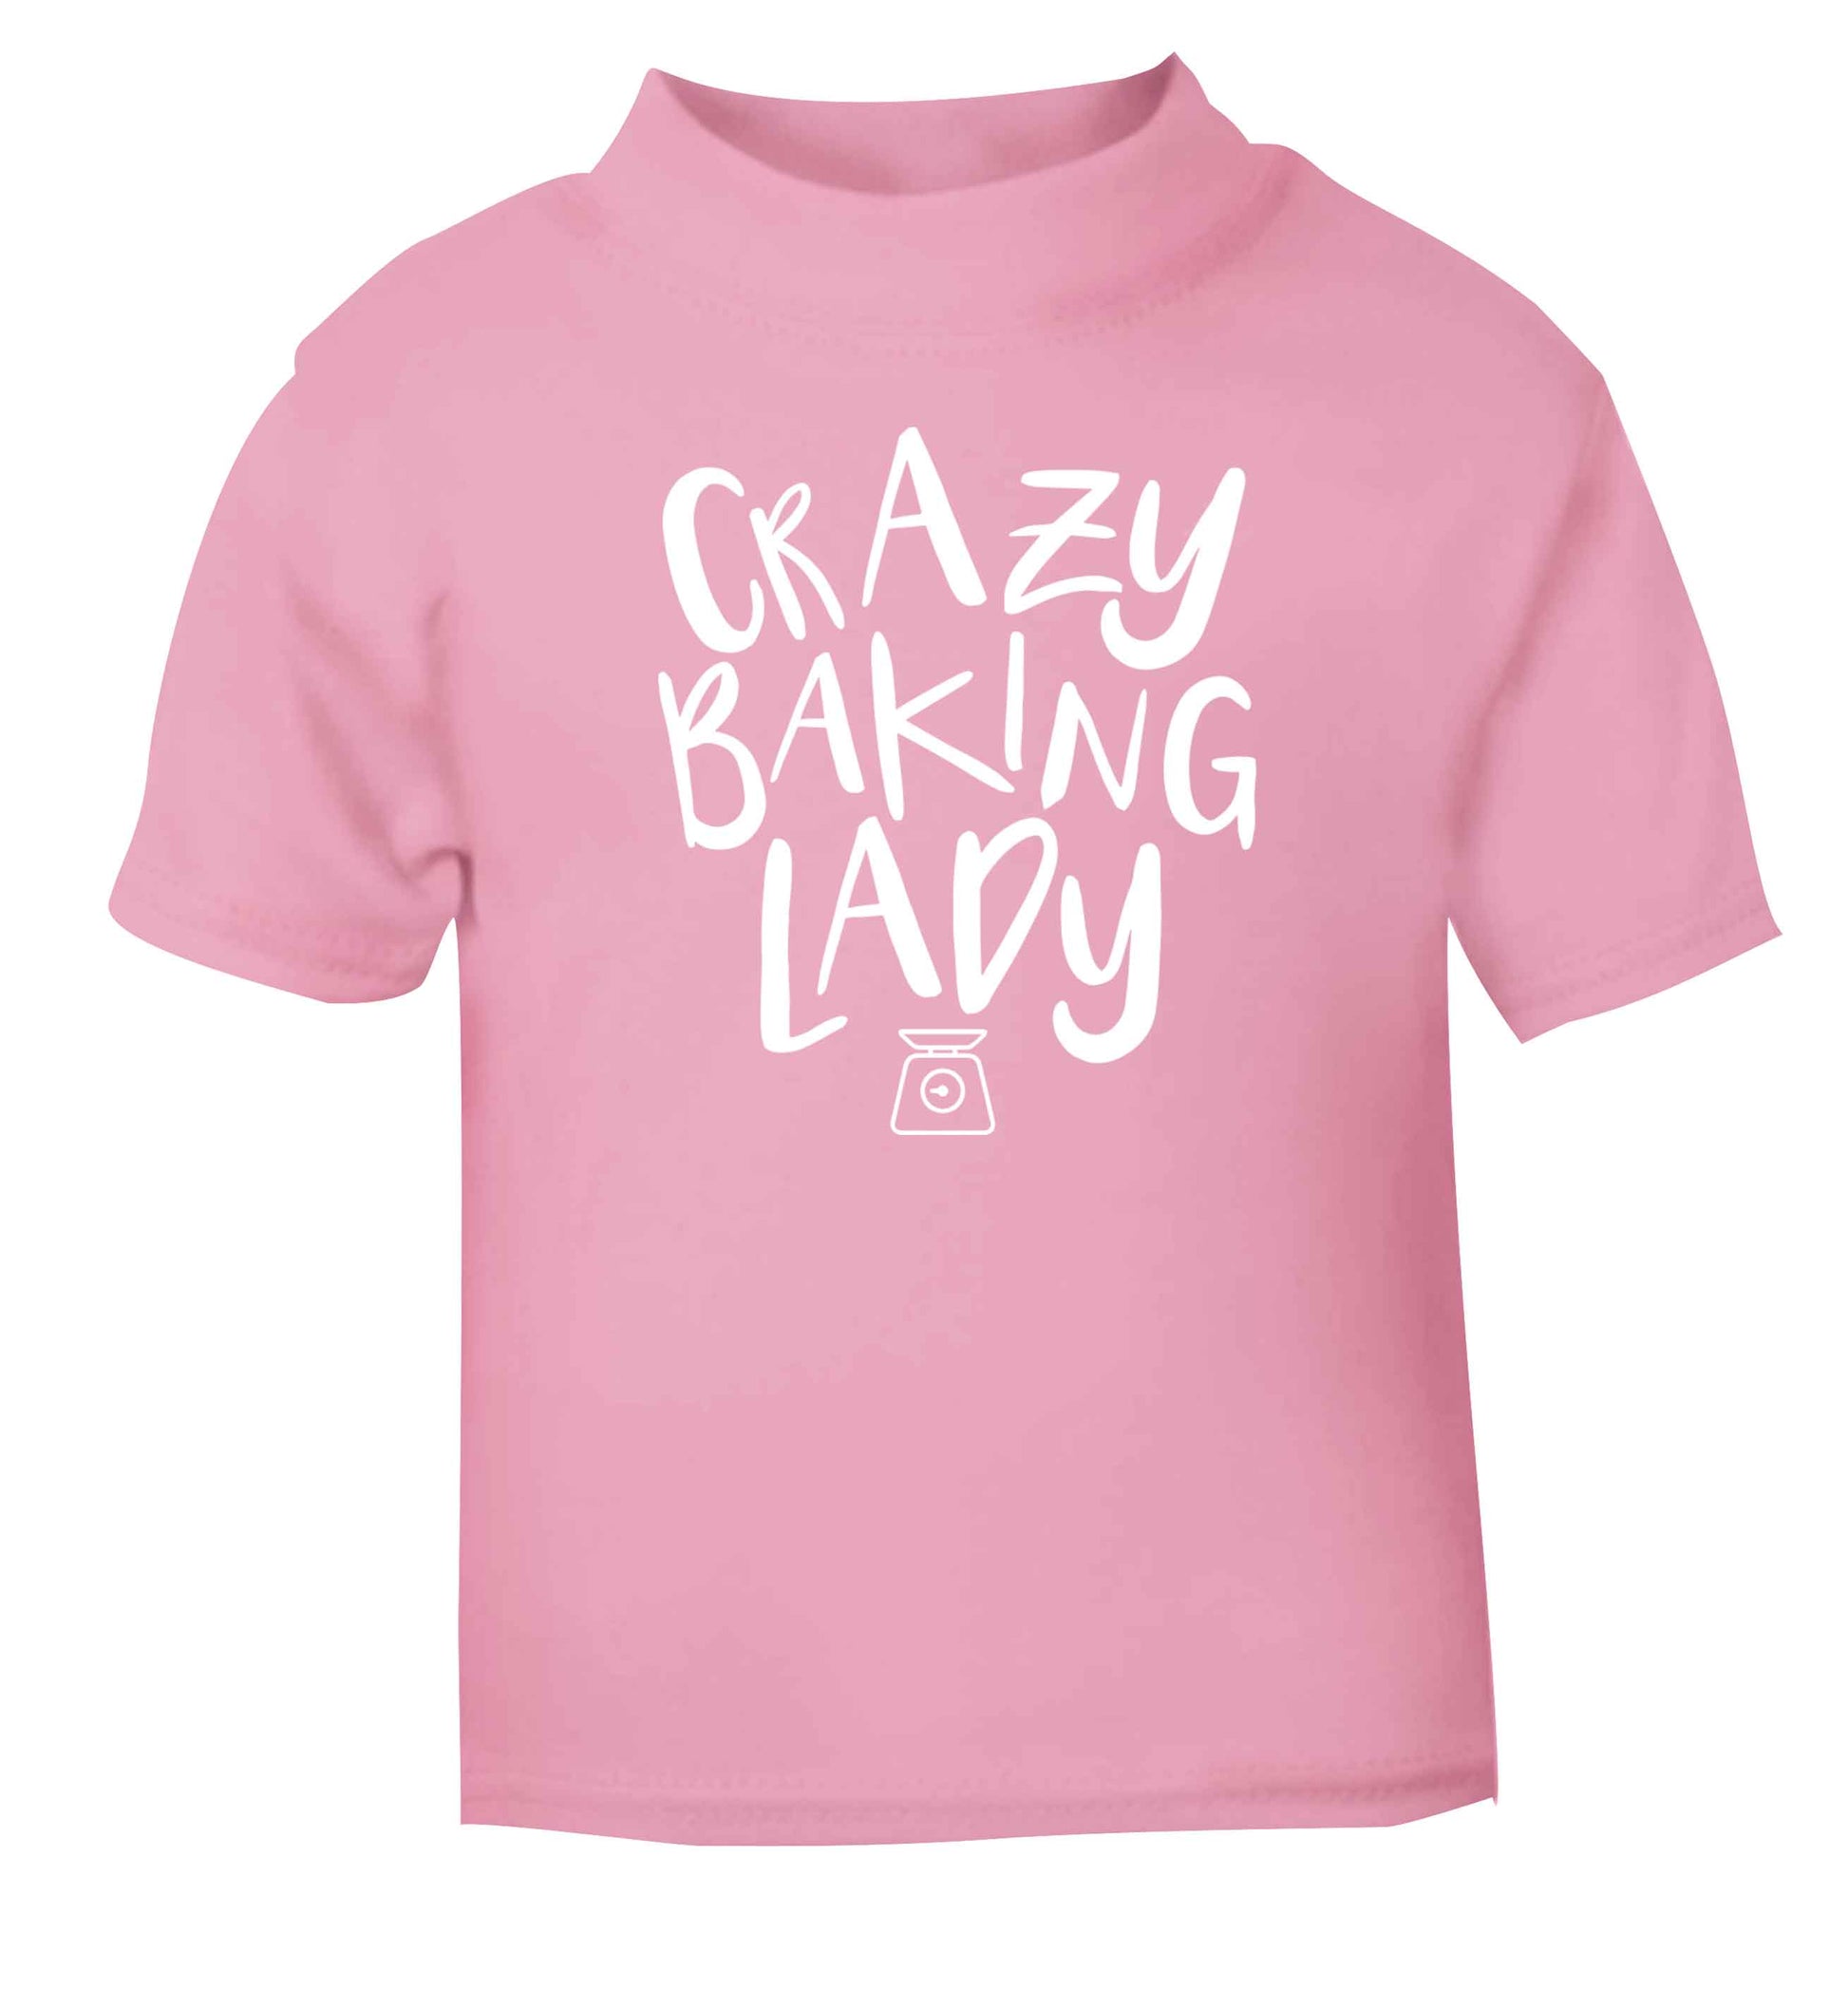 Crazy baking lady light pink Baby Toddler Tshirt 2 Years